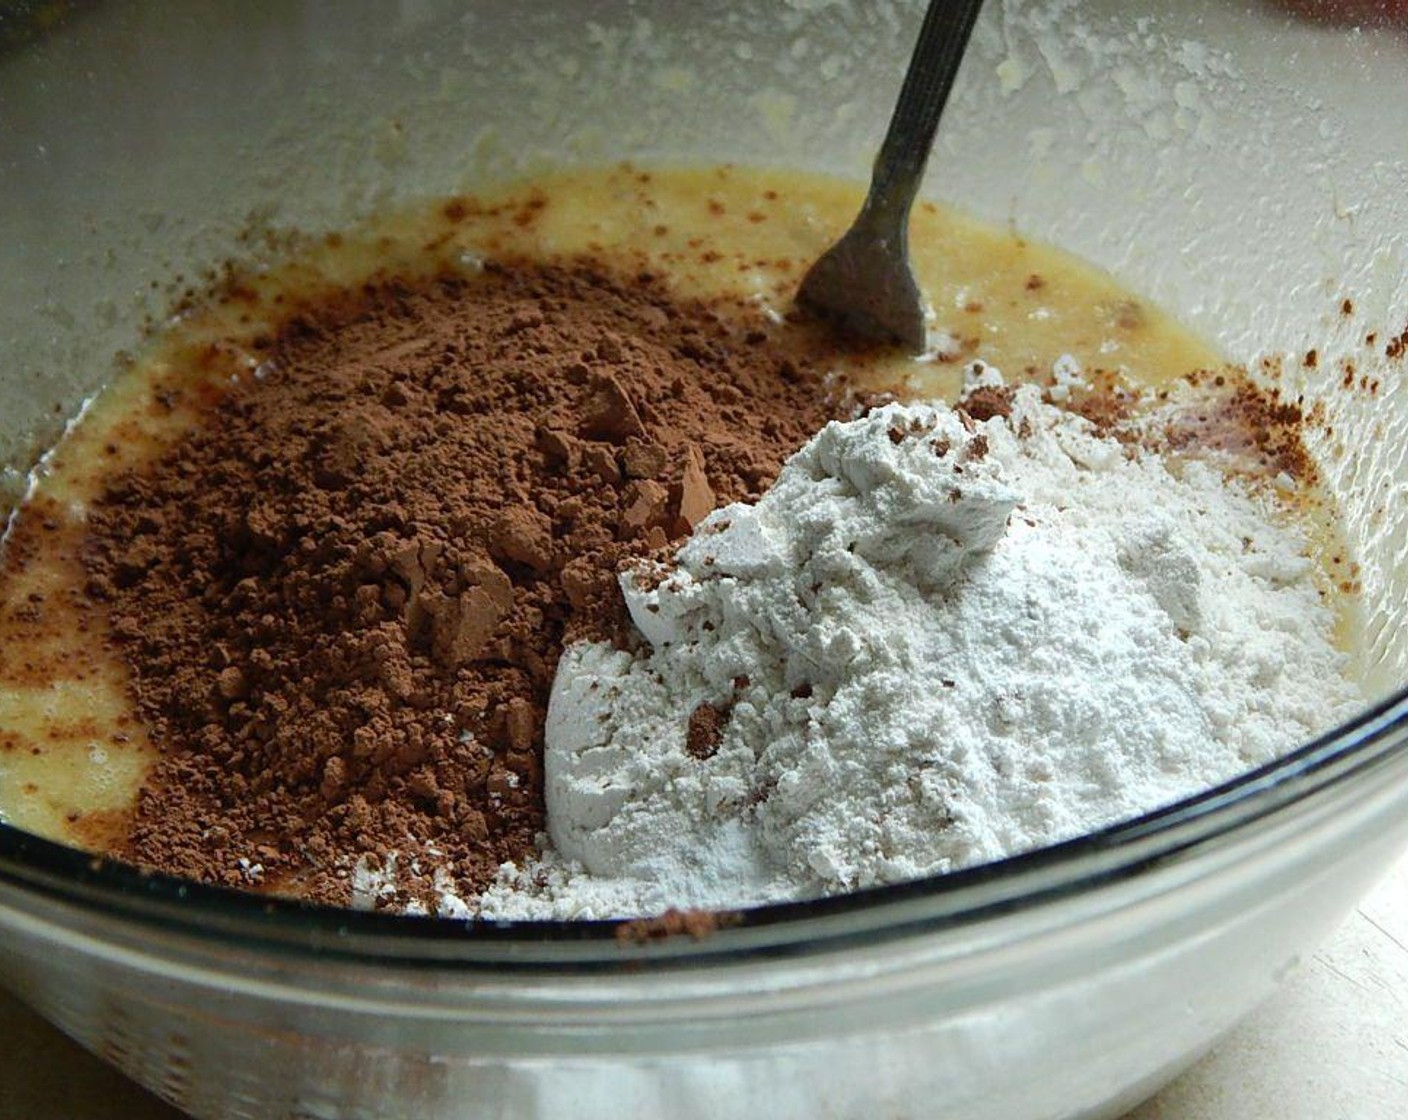 step 6 Mix in All-Purpose Flour (1 1/4 cups), Unsweetened Cocoa Powder (1/2 cup), Baking Powder (1 tsp), and Baking Soda (1 tsp).